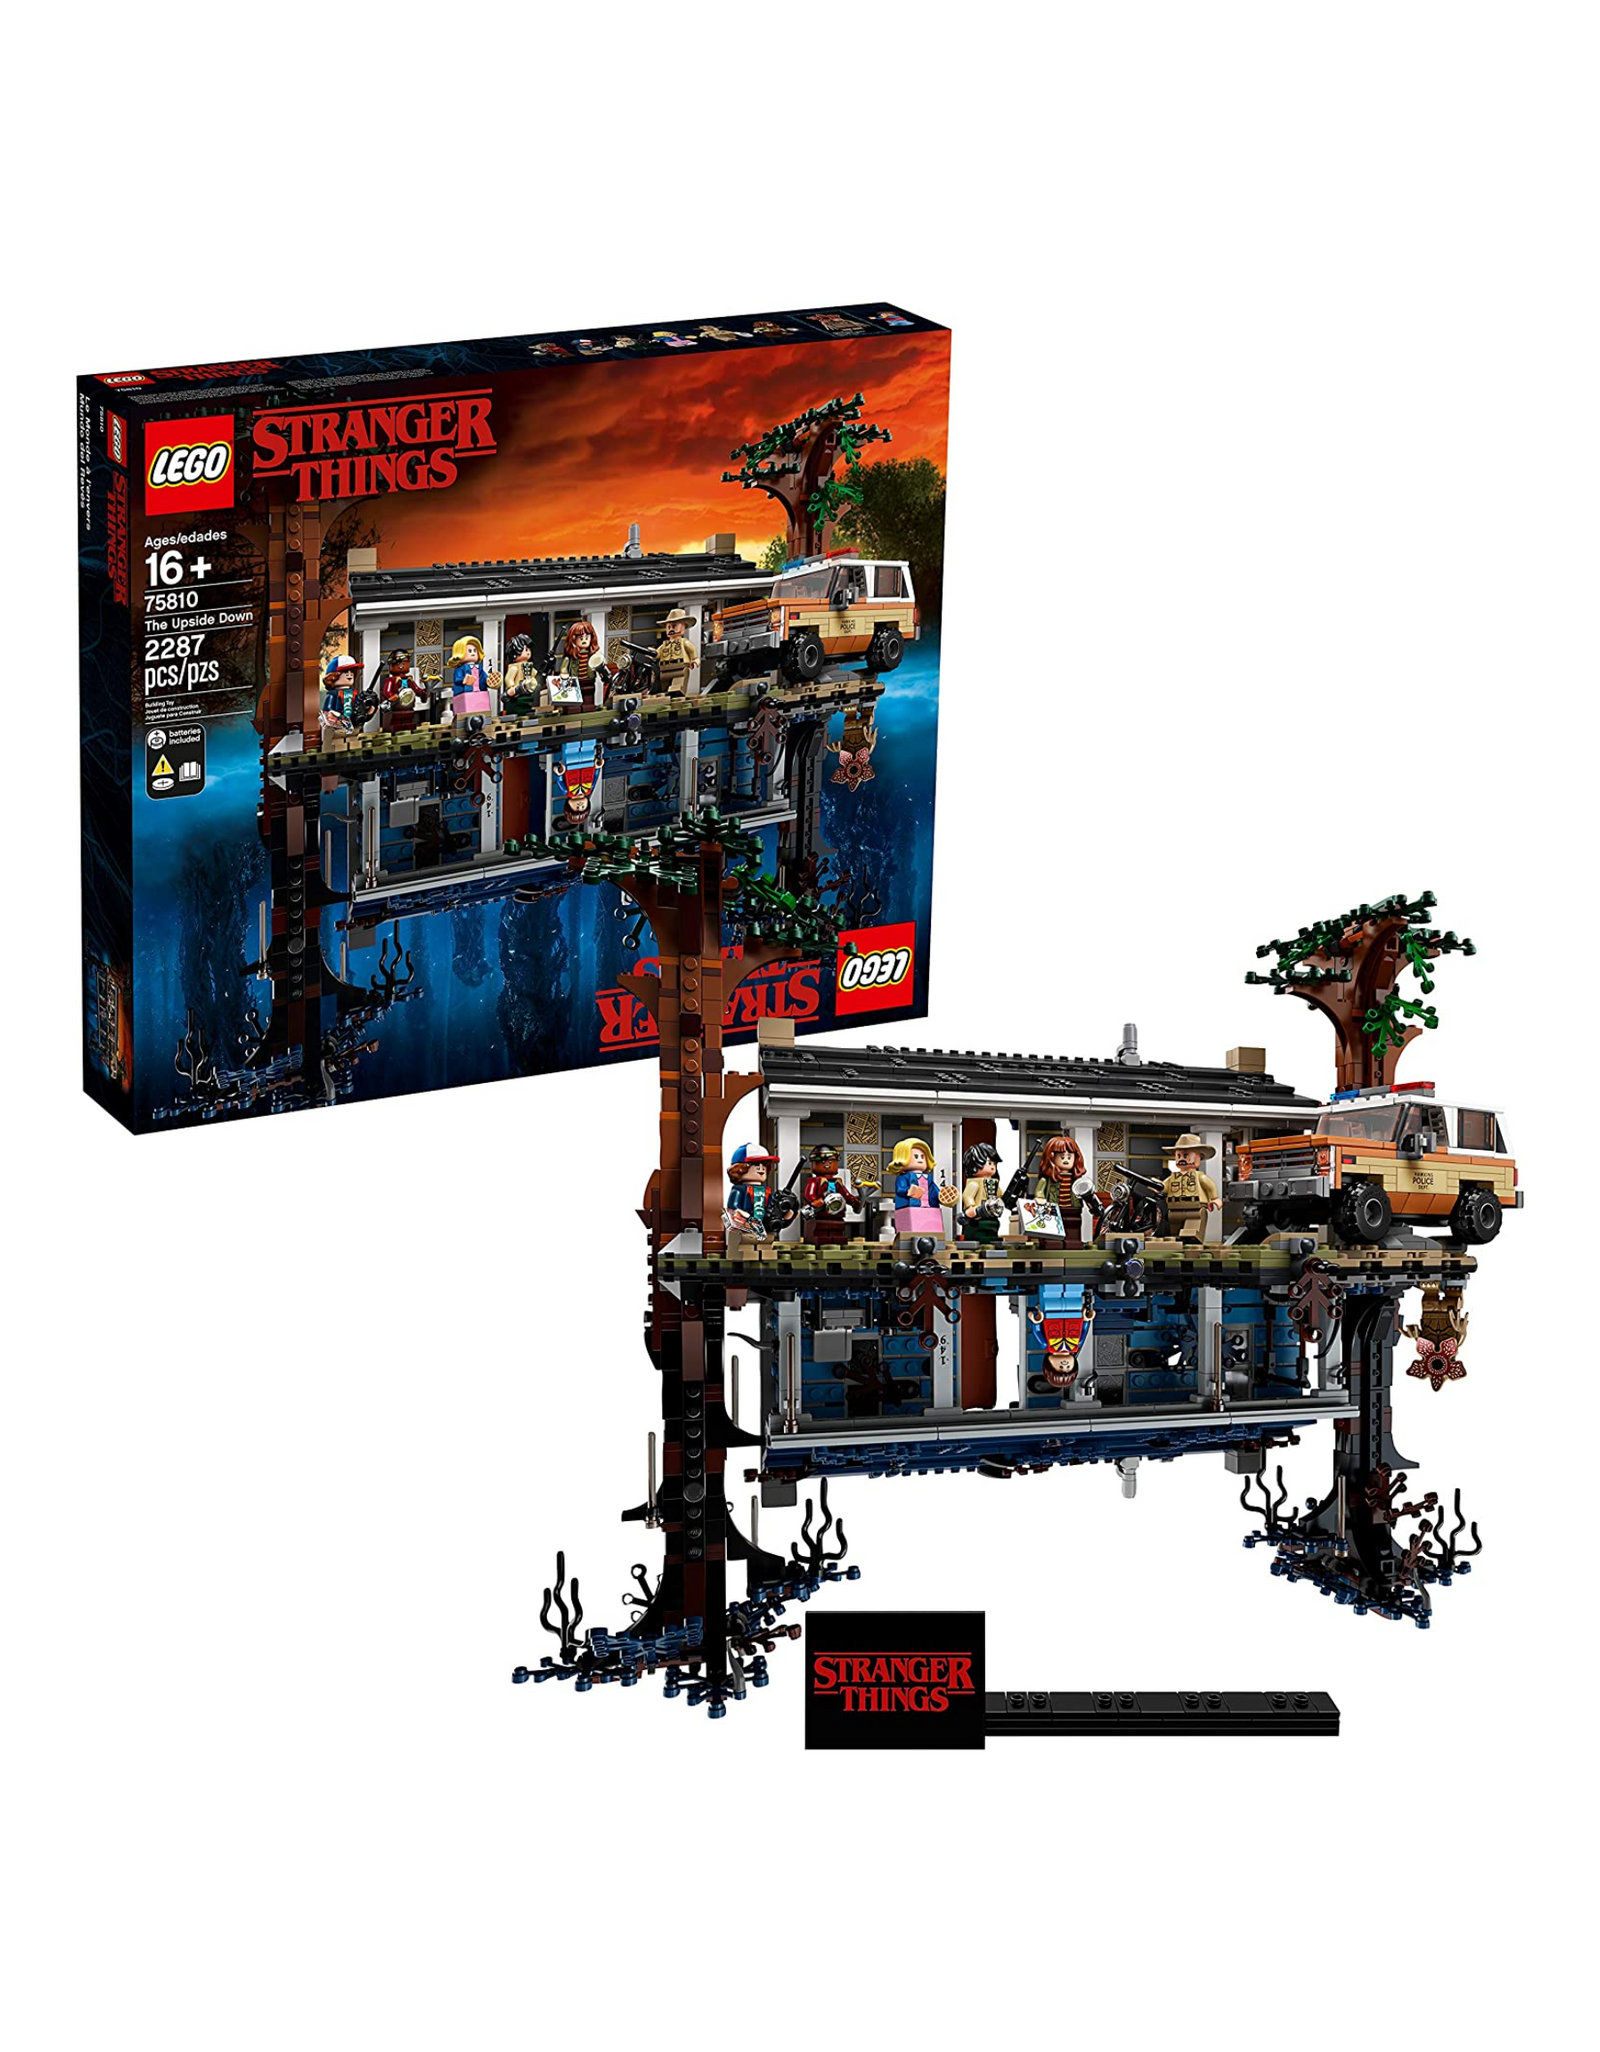 LEGO Stranger Things The Upside Down (75810) Building Kit - 2,287 Pieces